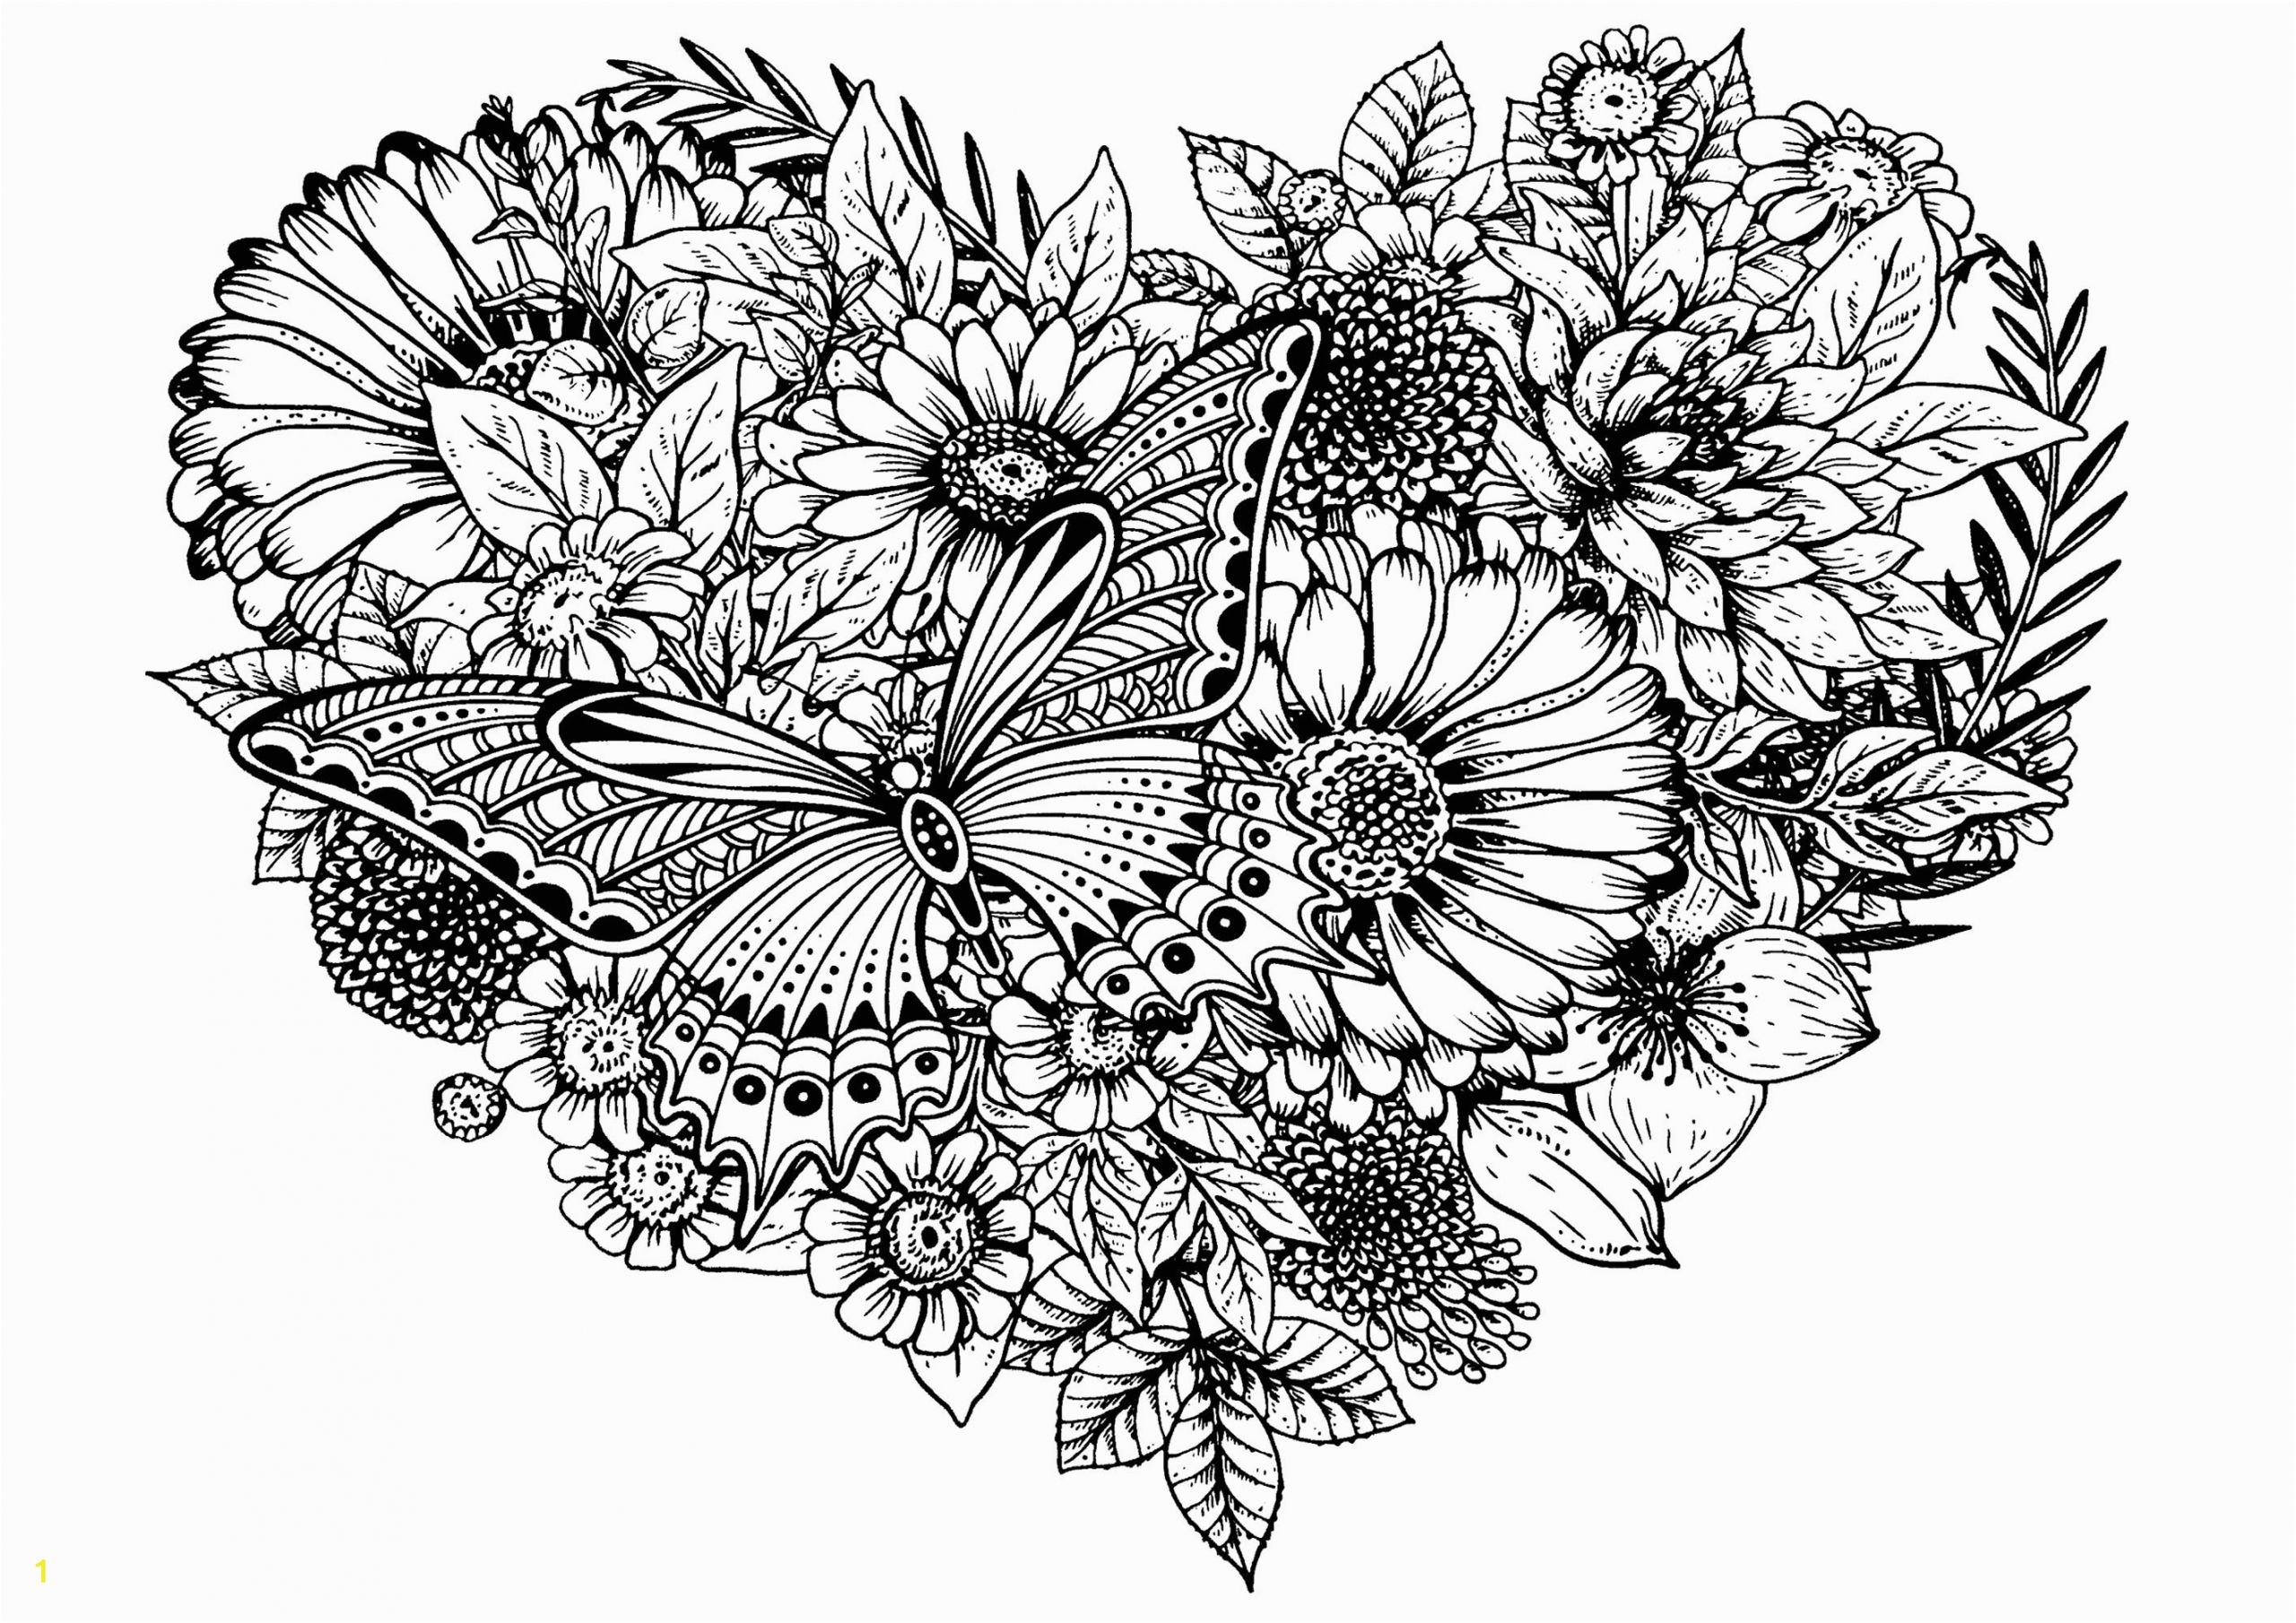 Butterflies and Flowers Coloring Pages for Adults Flowers & butterfly Flowers Adult Coloring Pages